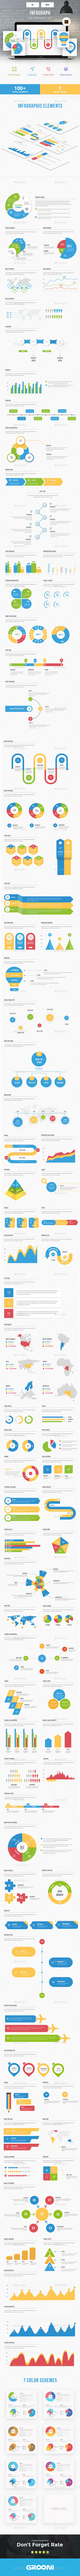 Infograph  - Infographic Elements Kit